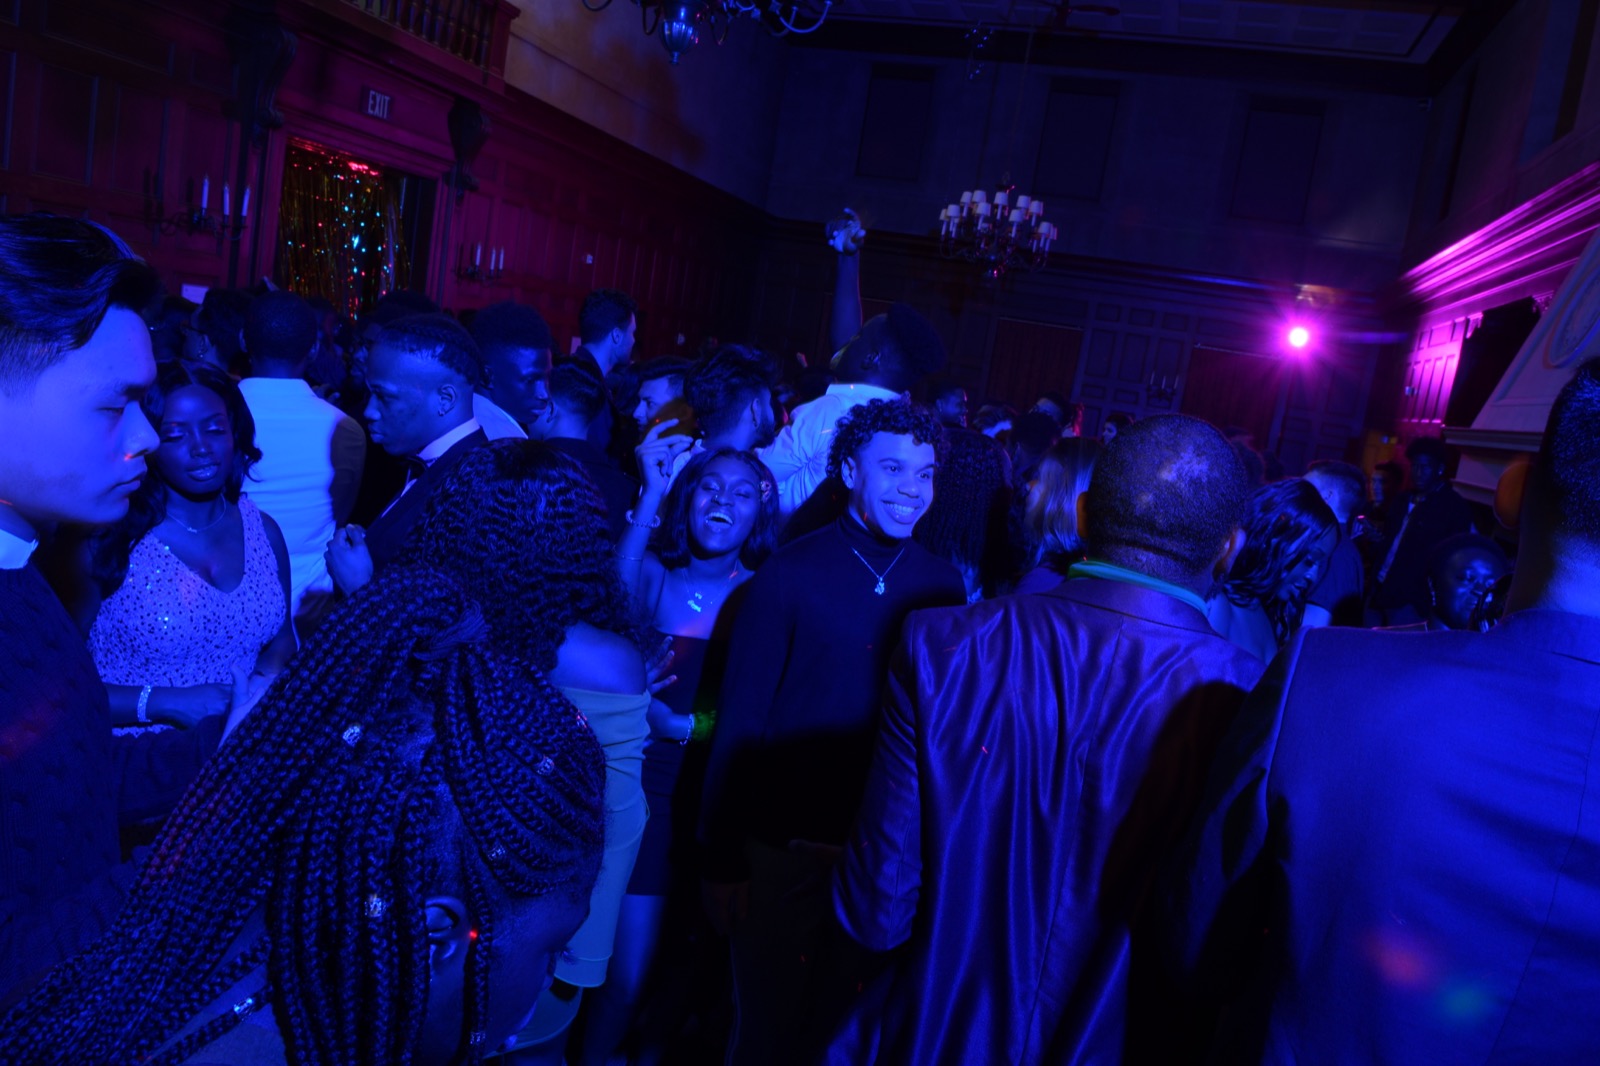 Bowdoin students joined with Bates and Colby to celebrate the Ebony Ball.